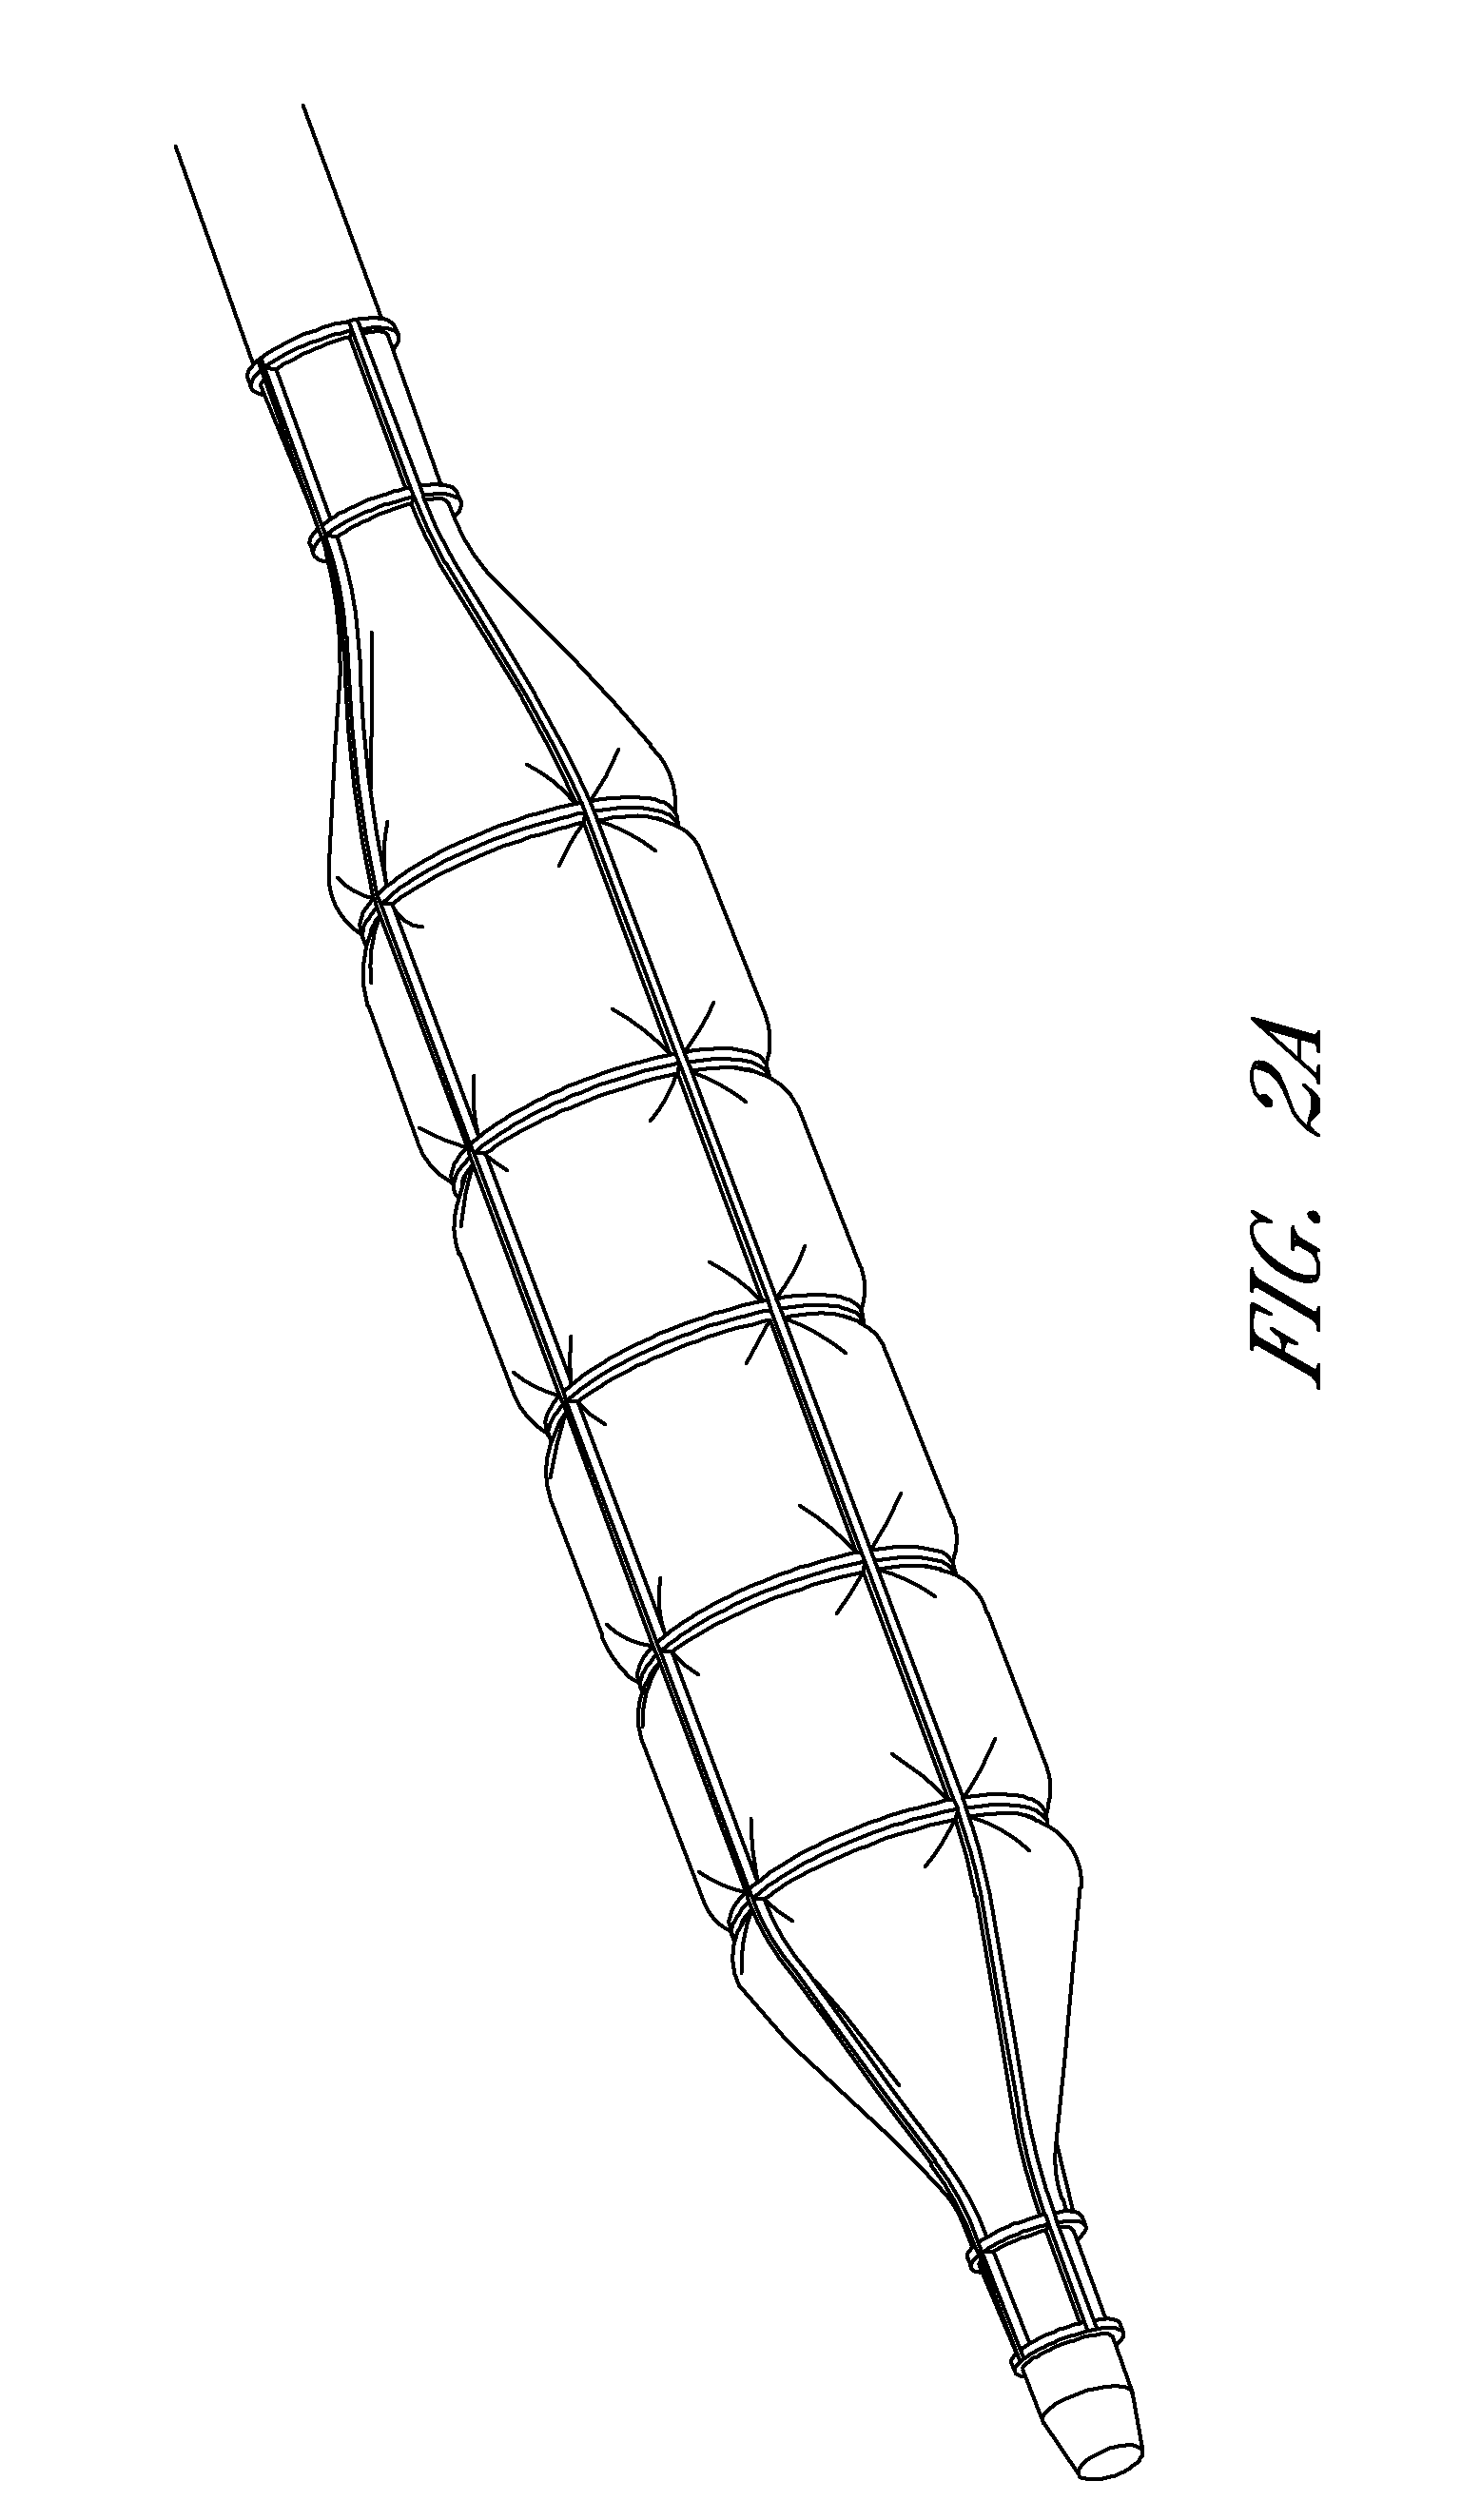 Device for compartmental dilatation of blood vessels